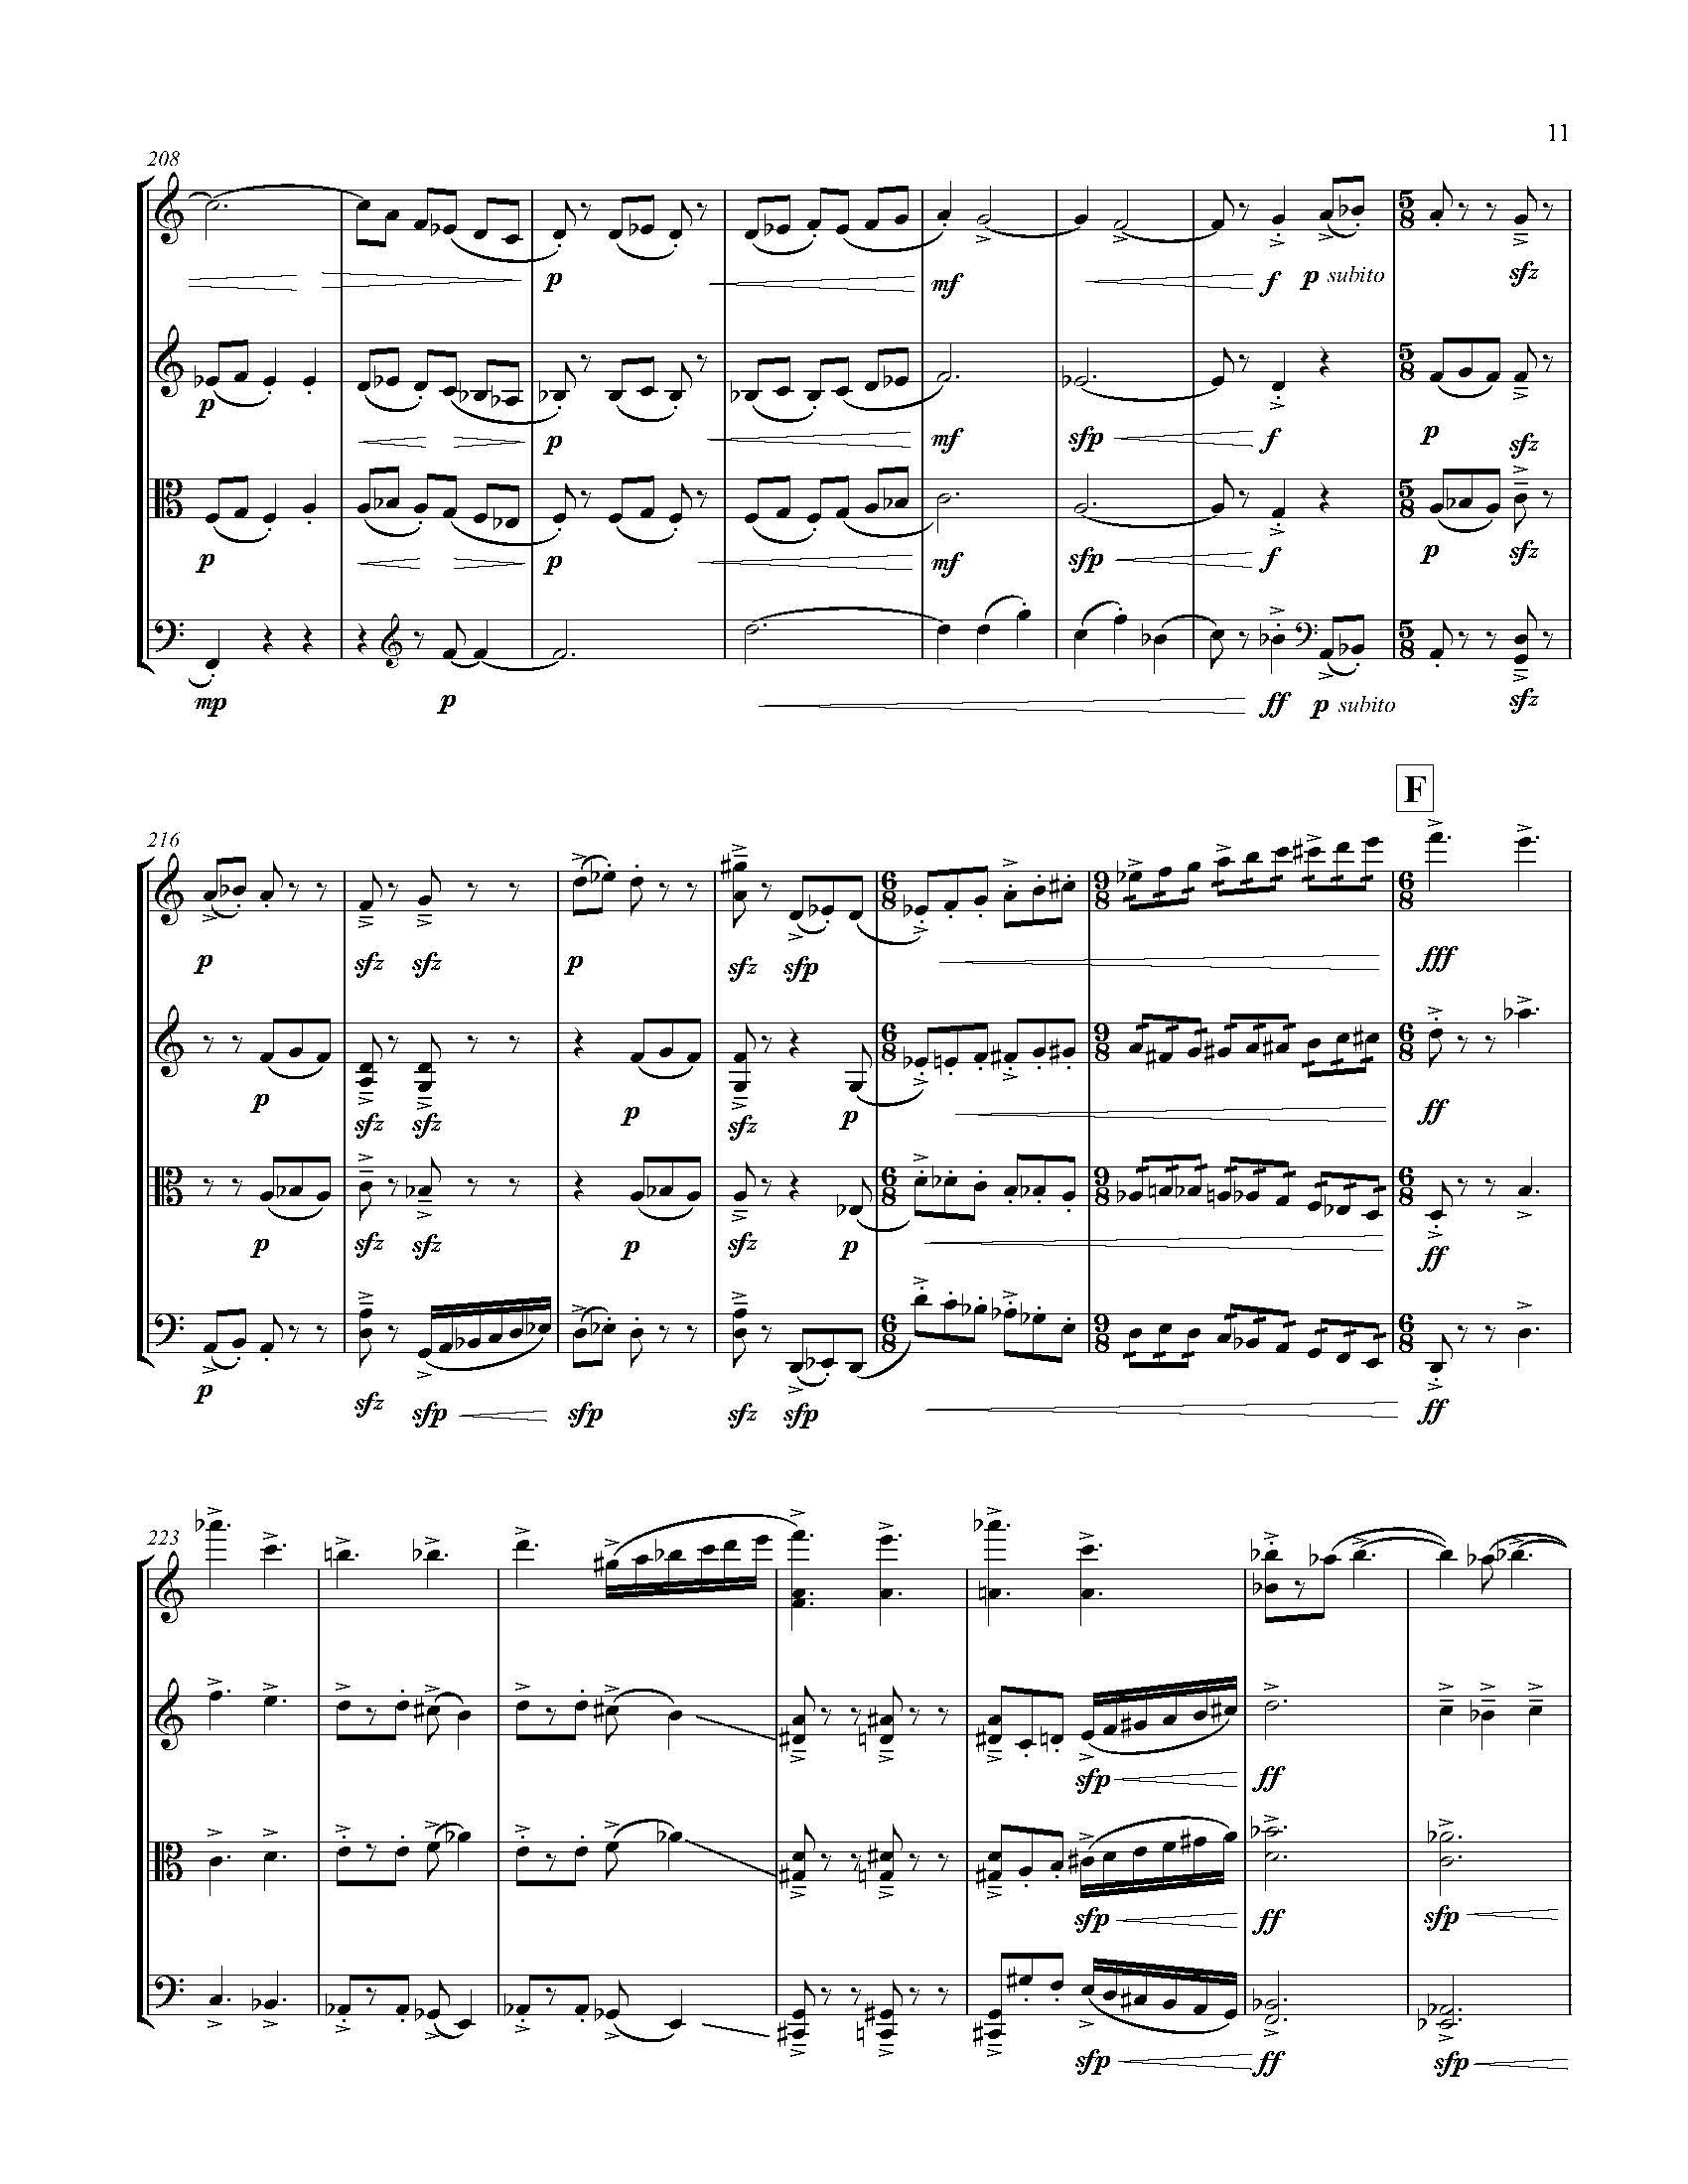 A Country of Vast Designs - Complete Score_Page_17.jpg